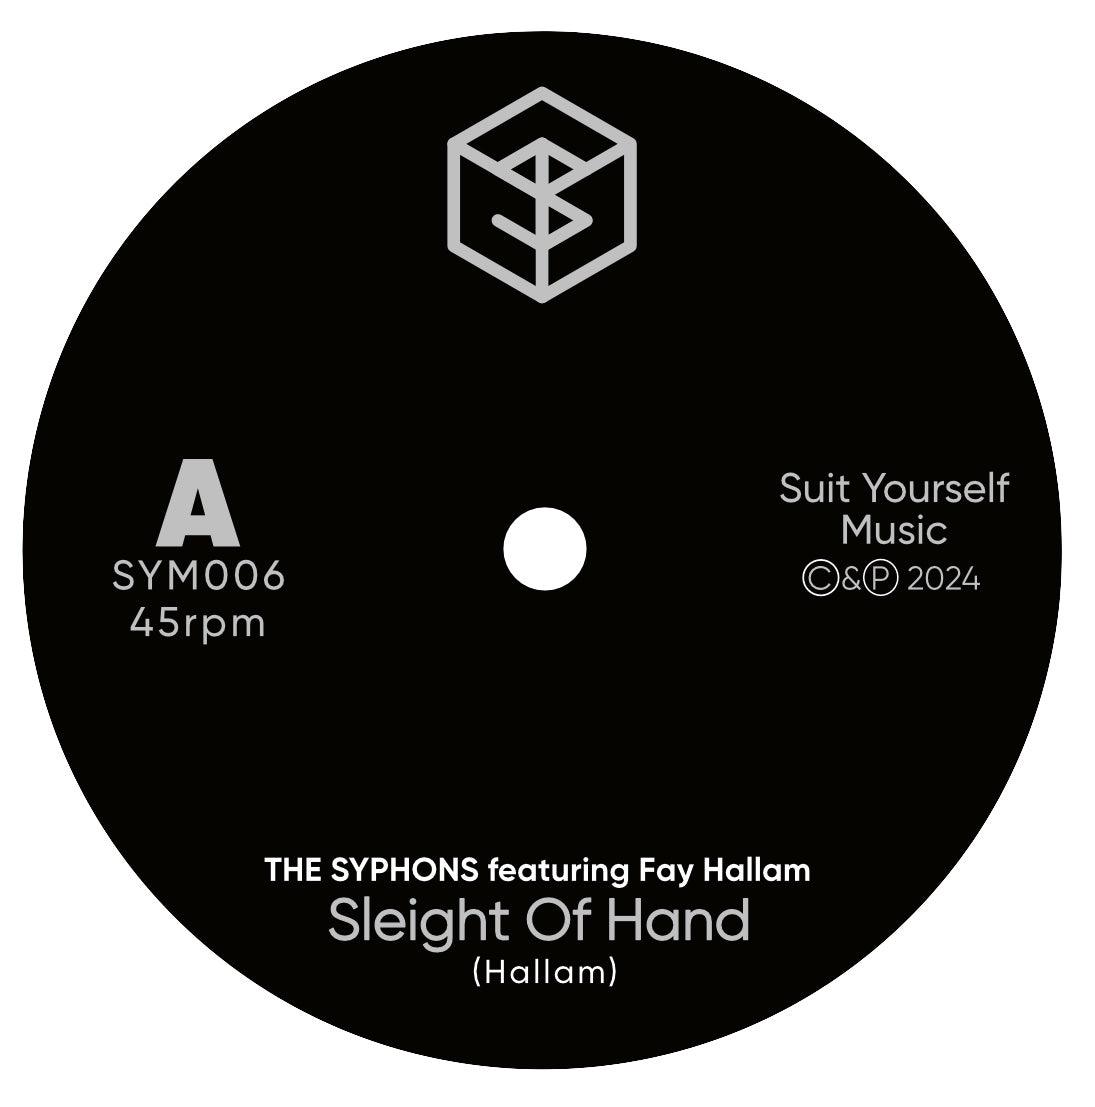 Sleight of Hand / Chancer: THE SYPHONS feat Fay Hallam (Pre-Release). - Suit Yourself Music